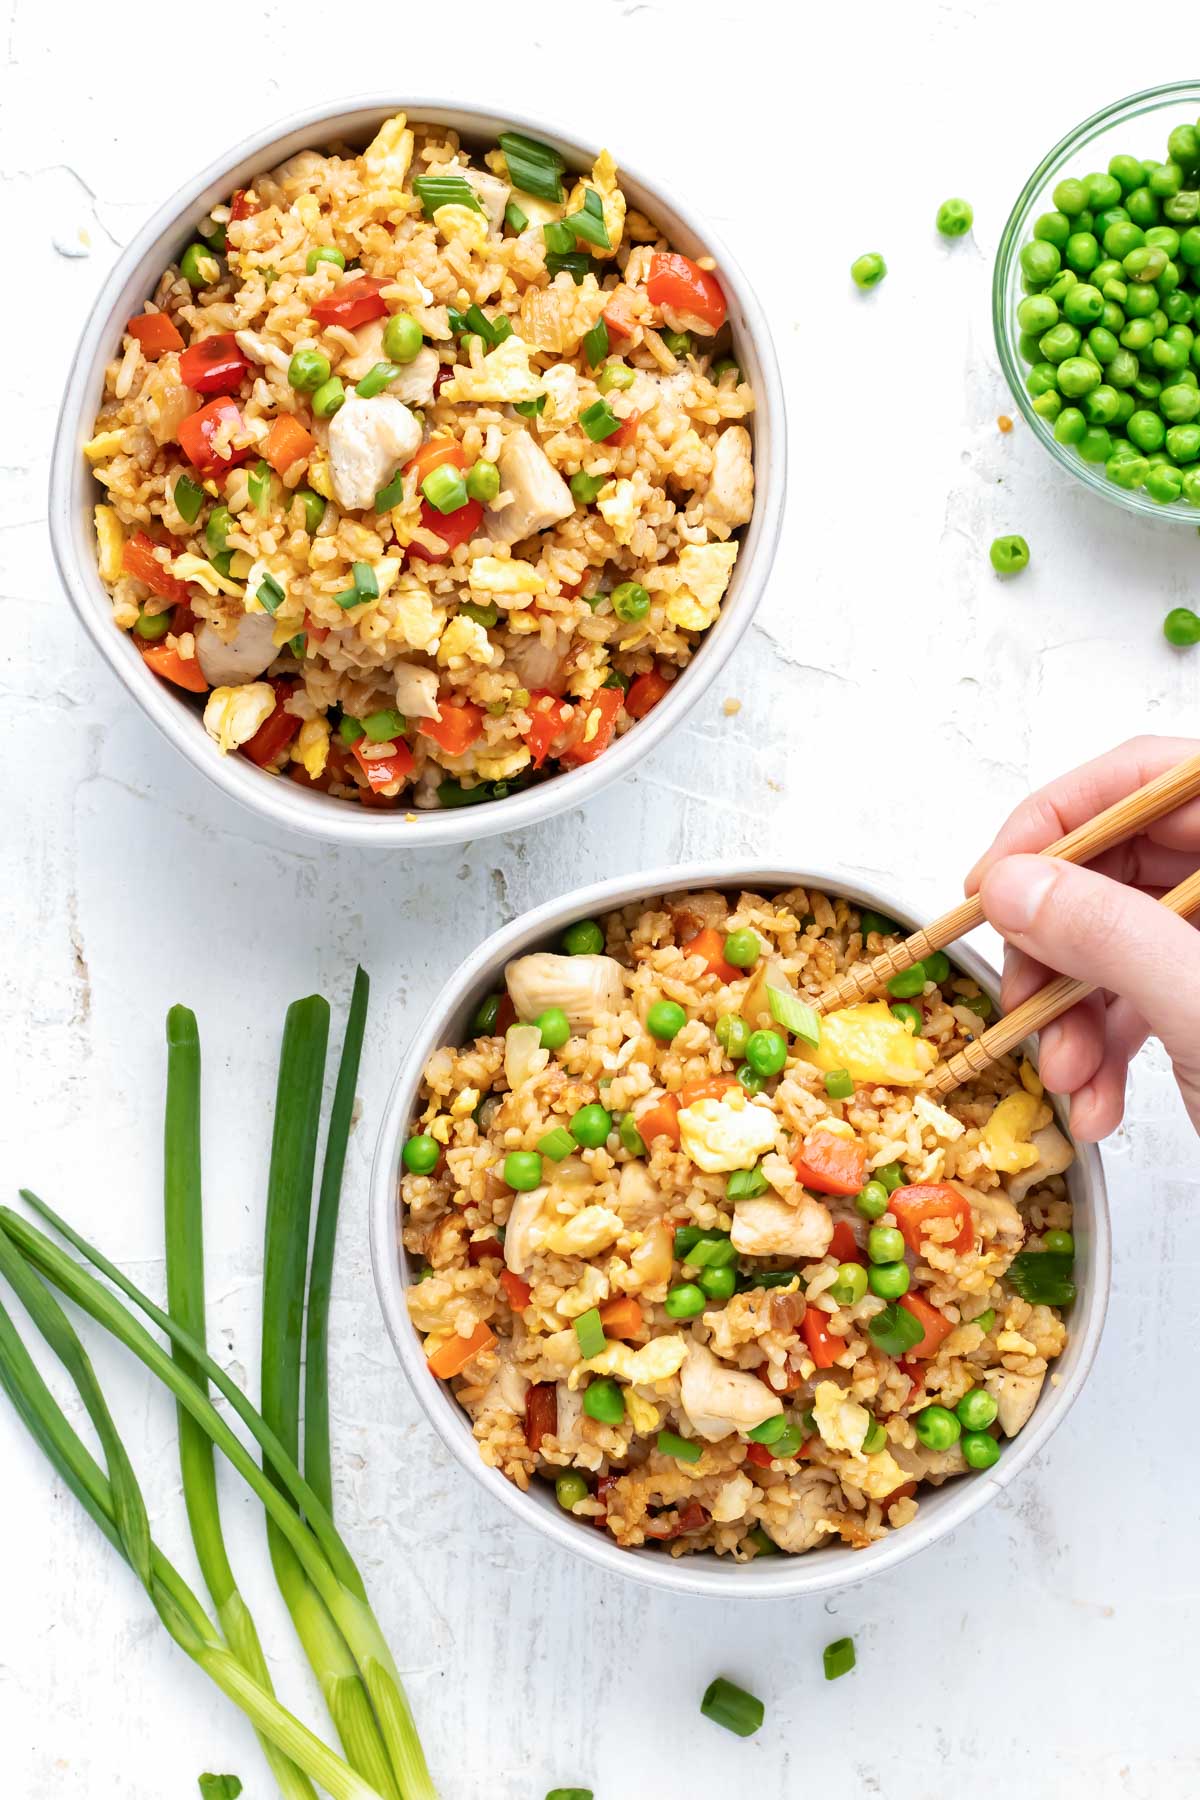 Chicken fried rice recipe being picked up with chopsticks out of a white bowl.